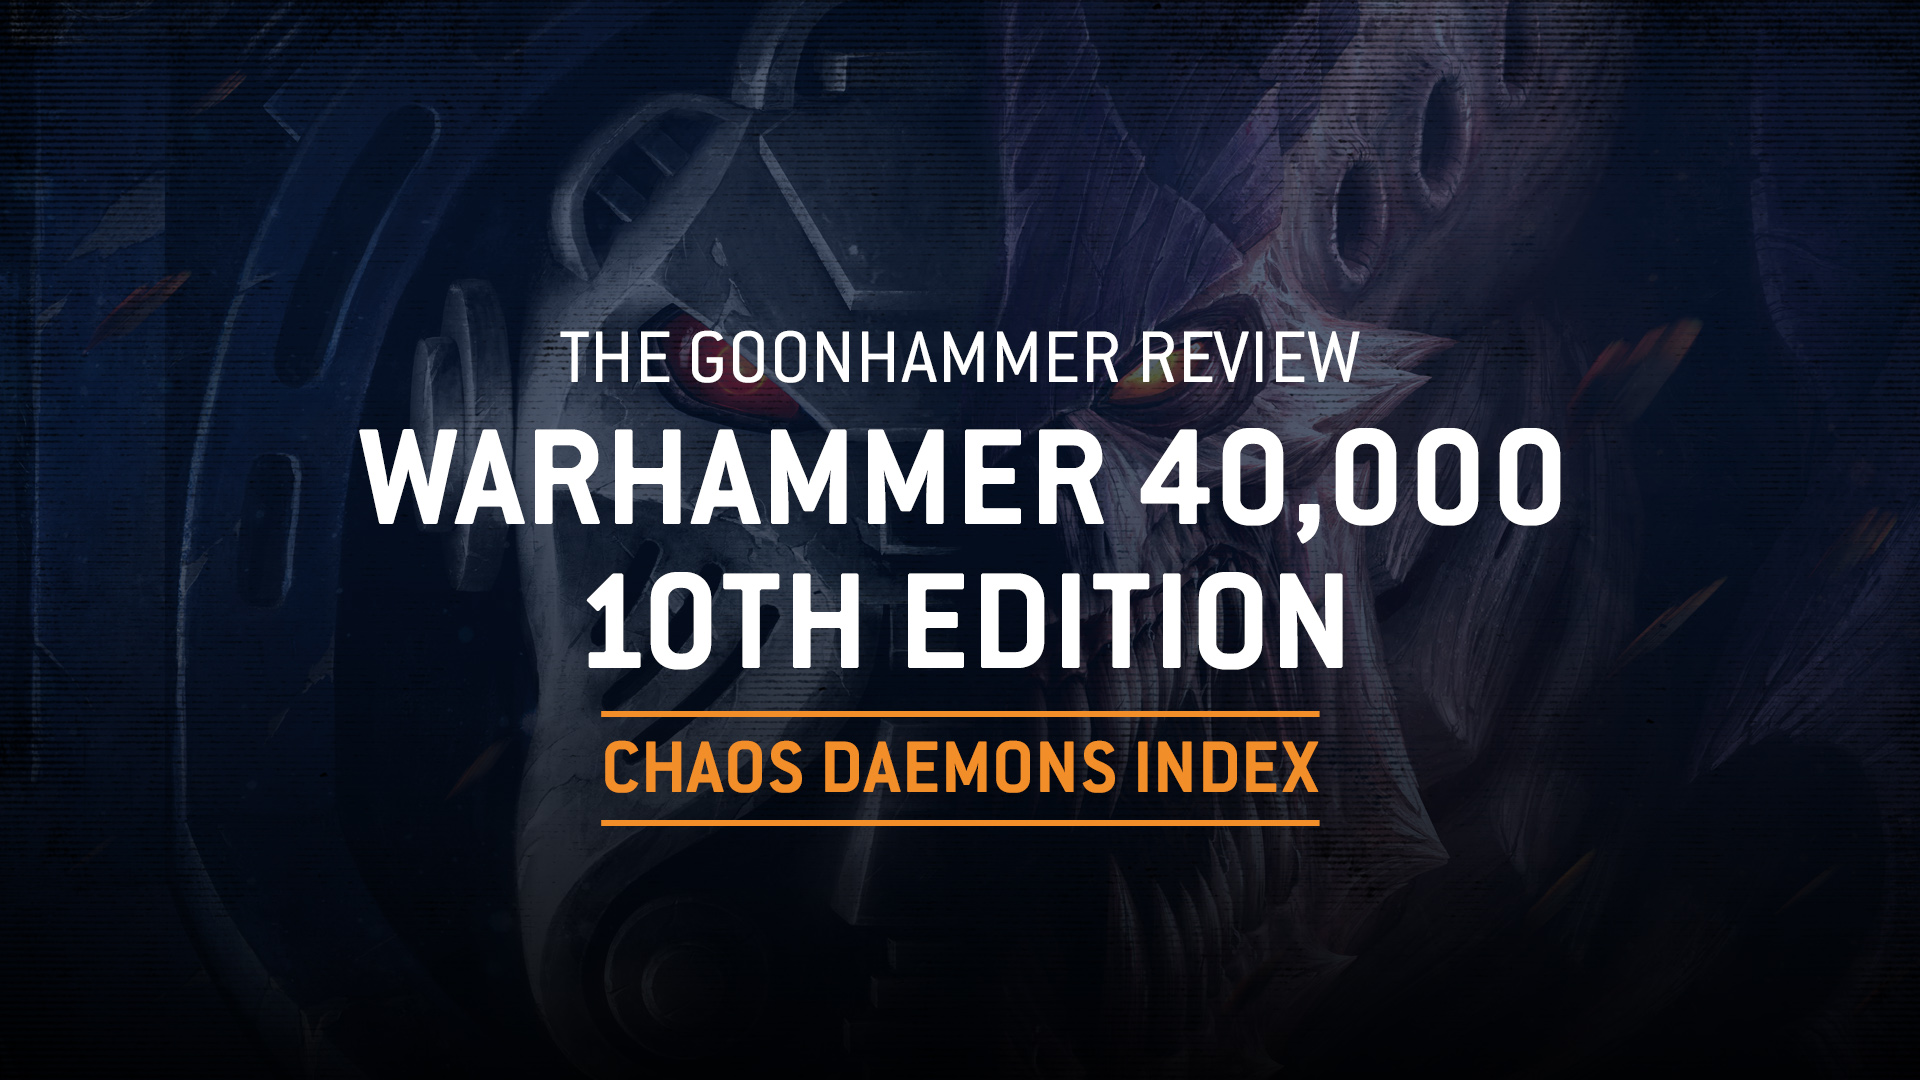 The Goonhammer Review: 10th Edition Chaos Daemons Index